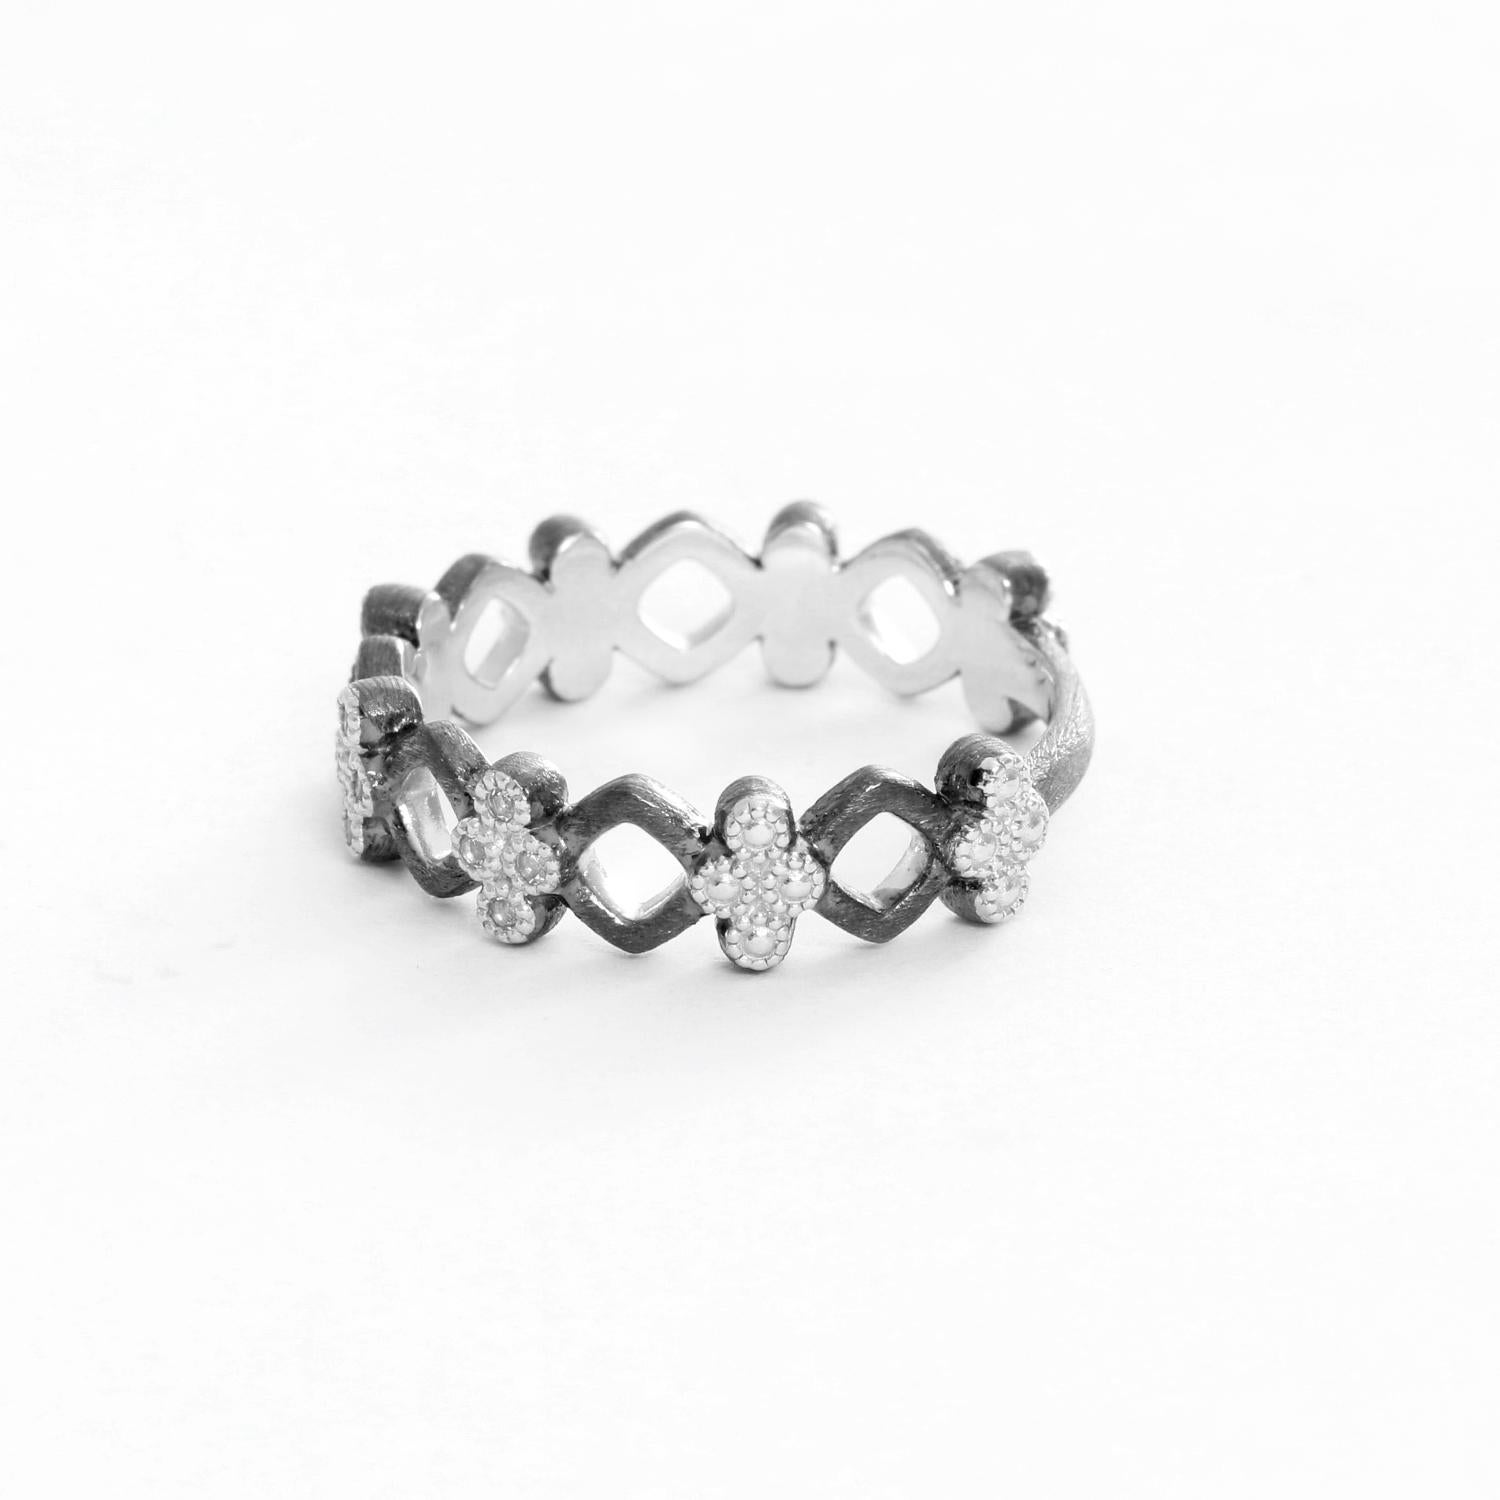 Jude Francis - Open Provence Sterling Silver and Black Rhodium with White Topaz Band Size 6.5 - . Beaded beset set round faceted White Topaz set in Sterling Silver. Brushed with Black Rhodium. Signed JFJ. Width 5 mm . Size 6.5. Perfect for every day